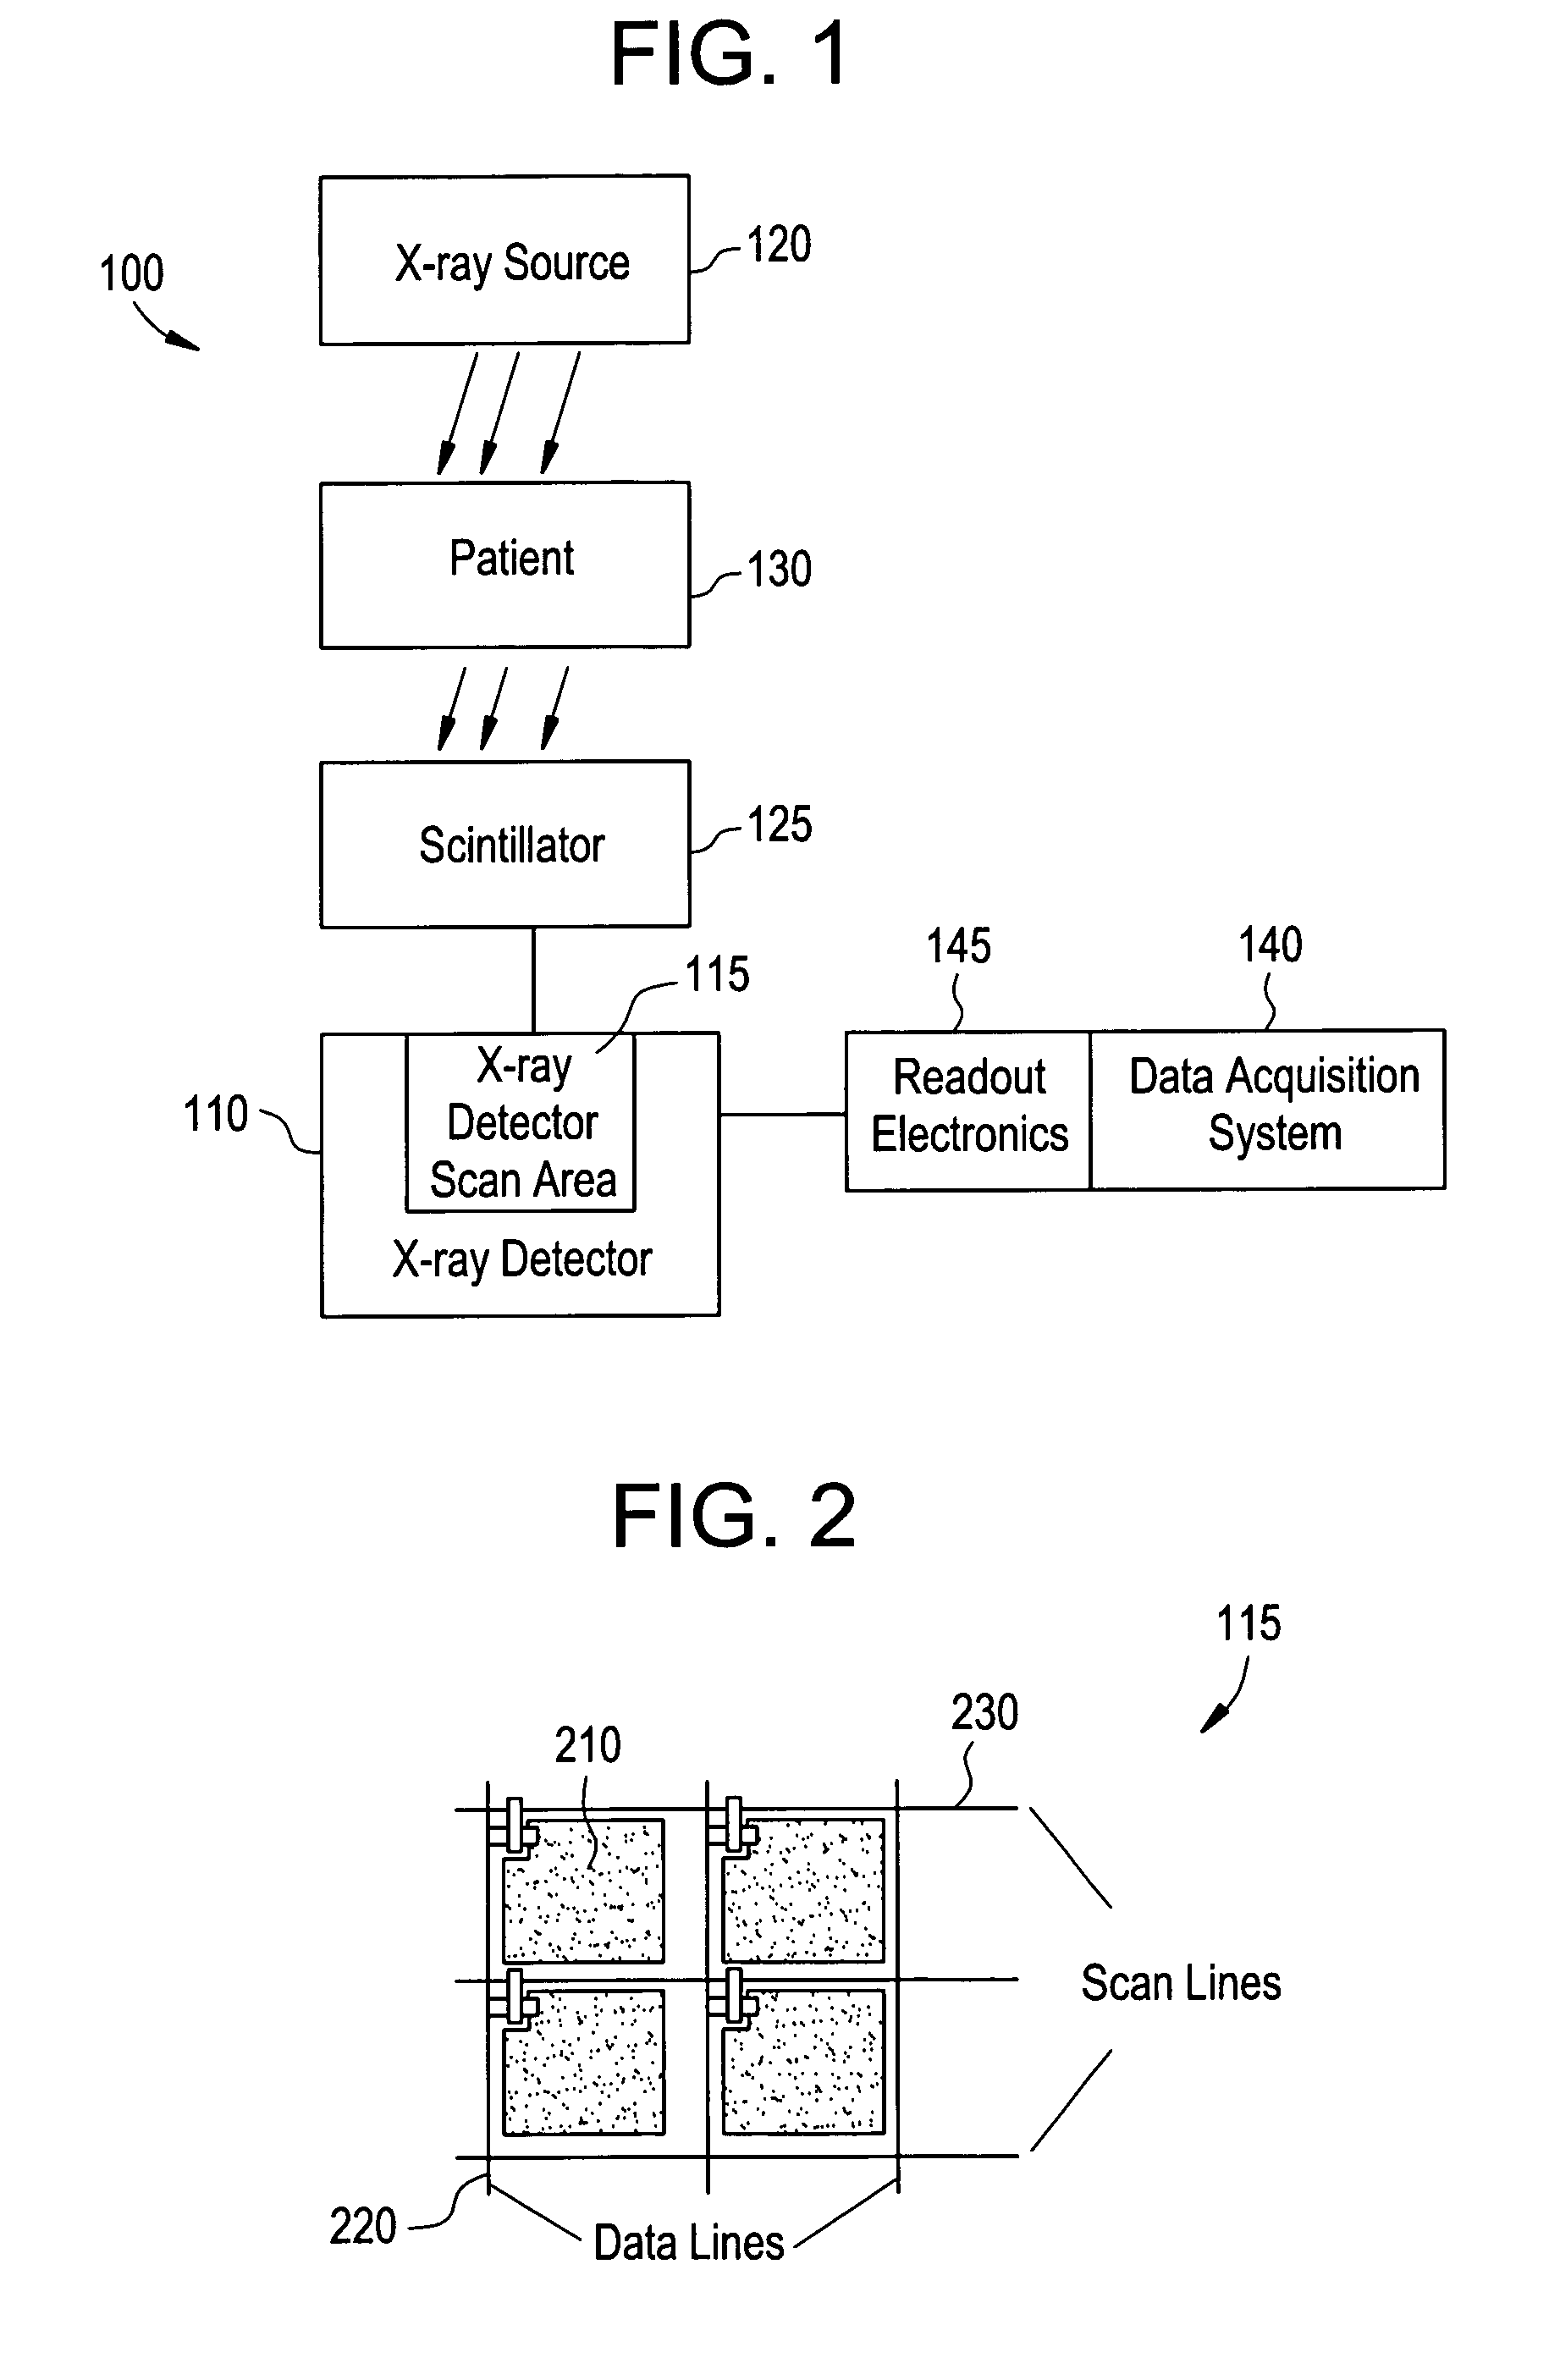 Method and apparatus for improved data acquisition using a solid state digital X-ray detector